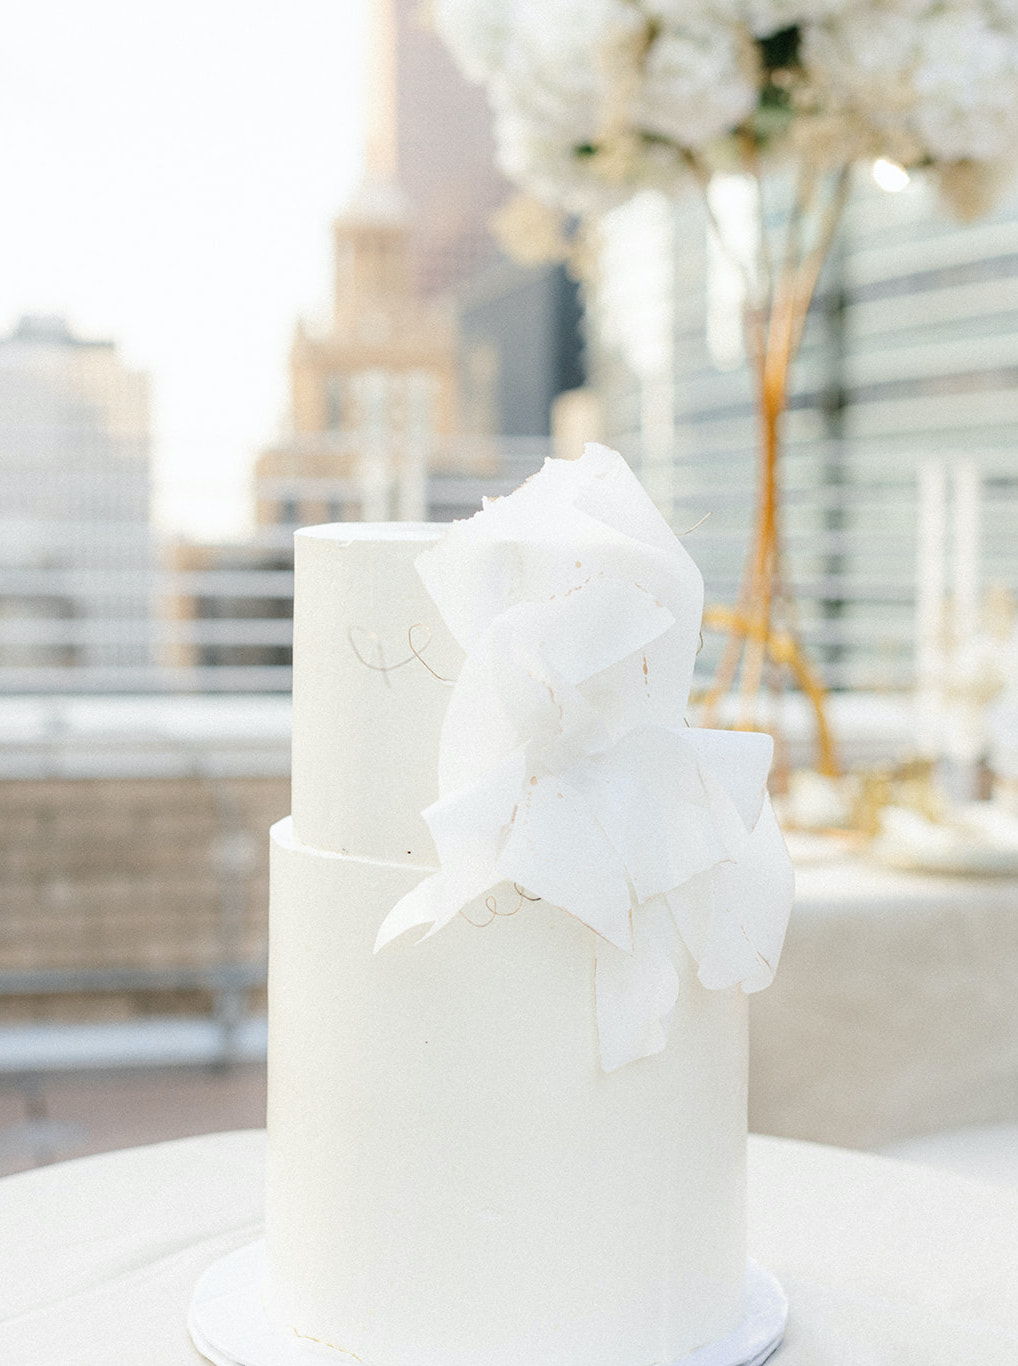 The wedding cake is pure white with a ruffled design on the side.